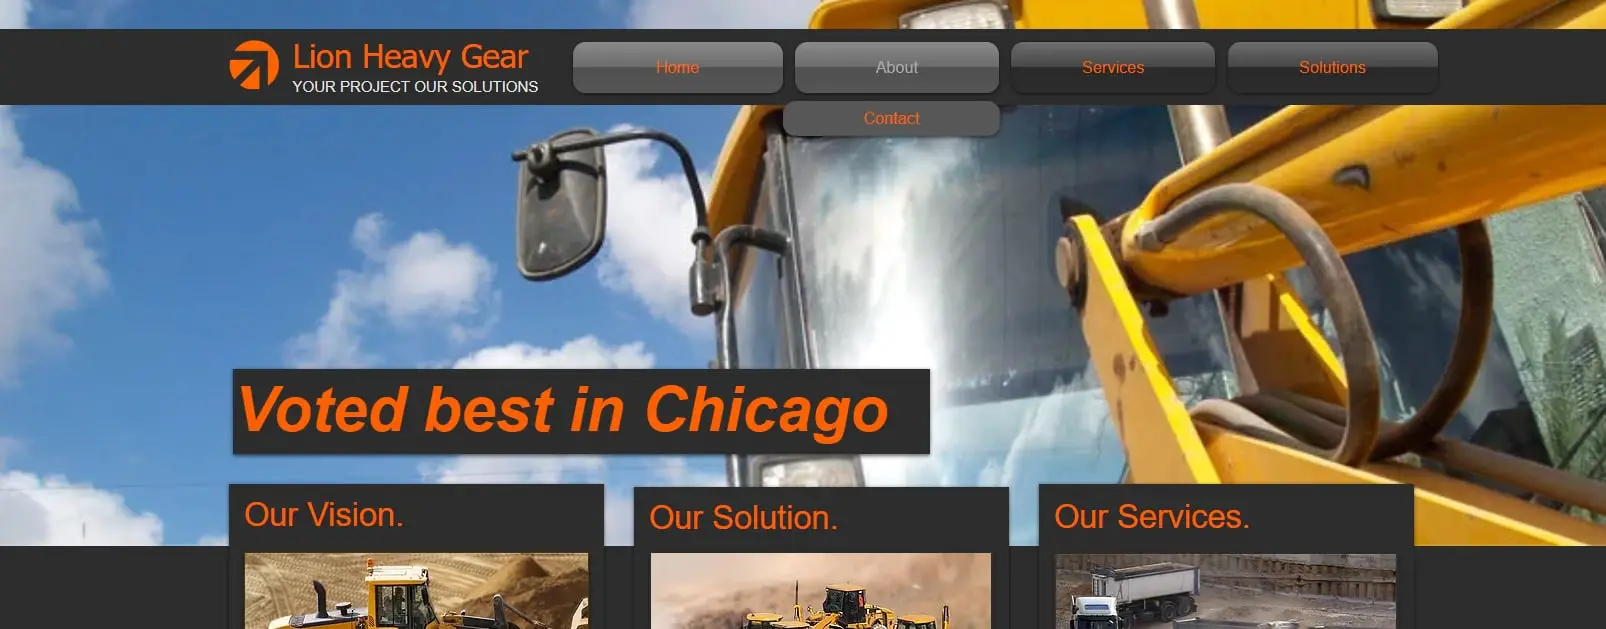 Super Load Movers Website Template